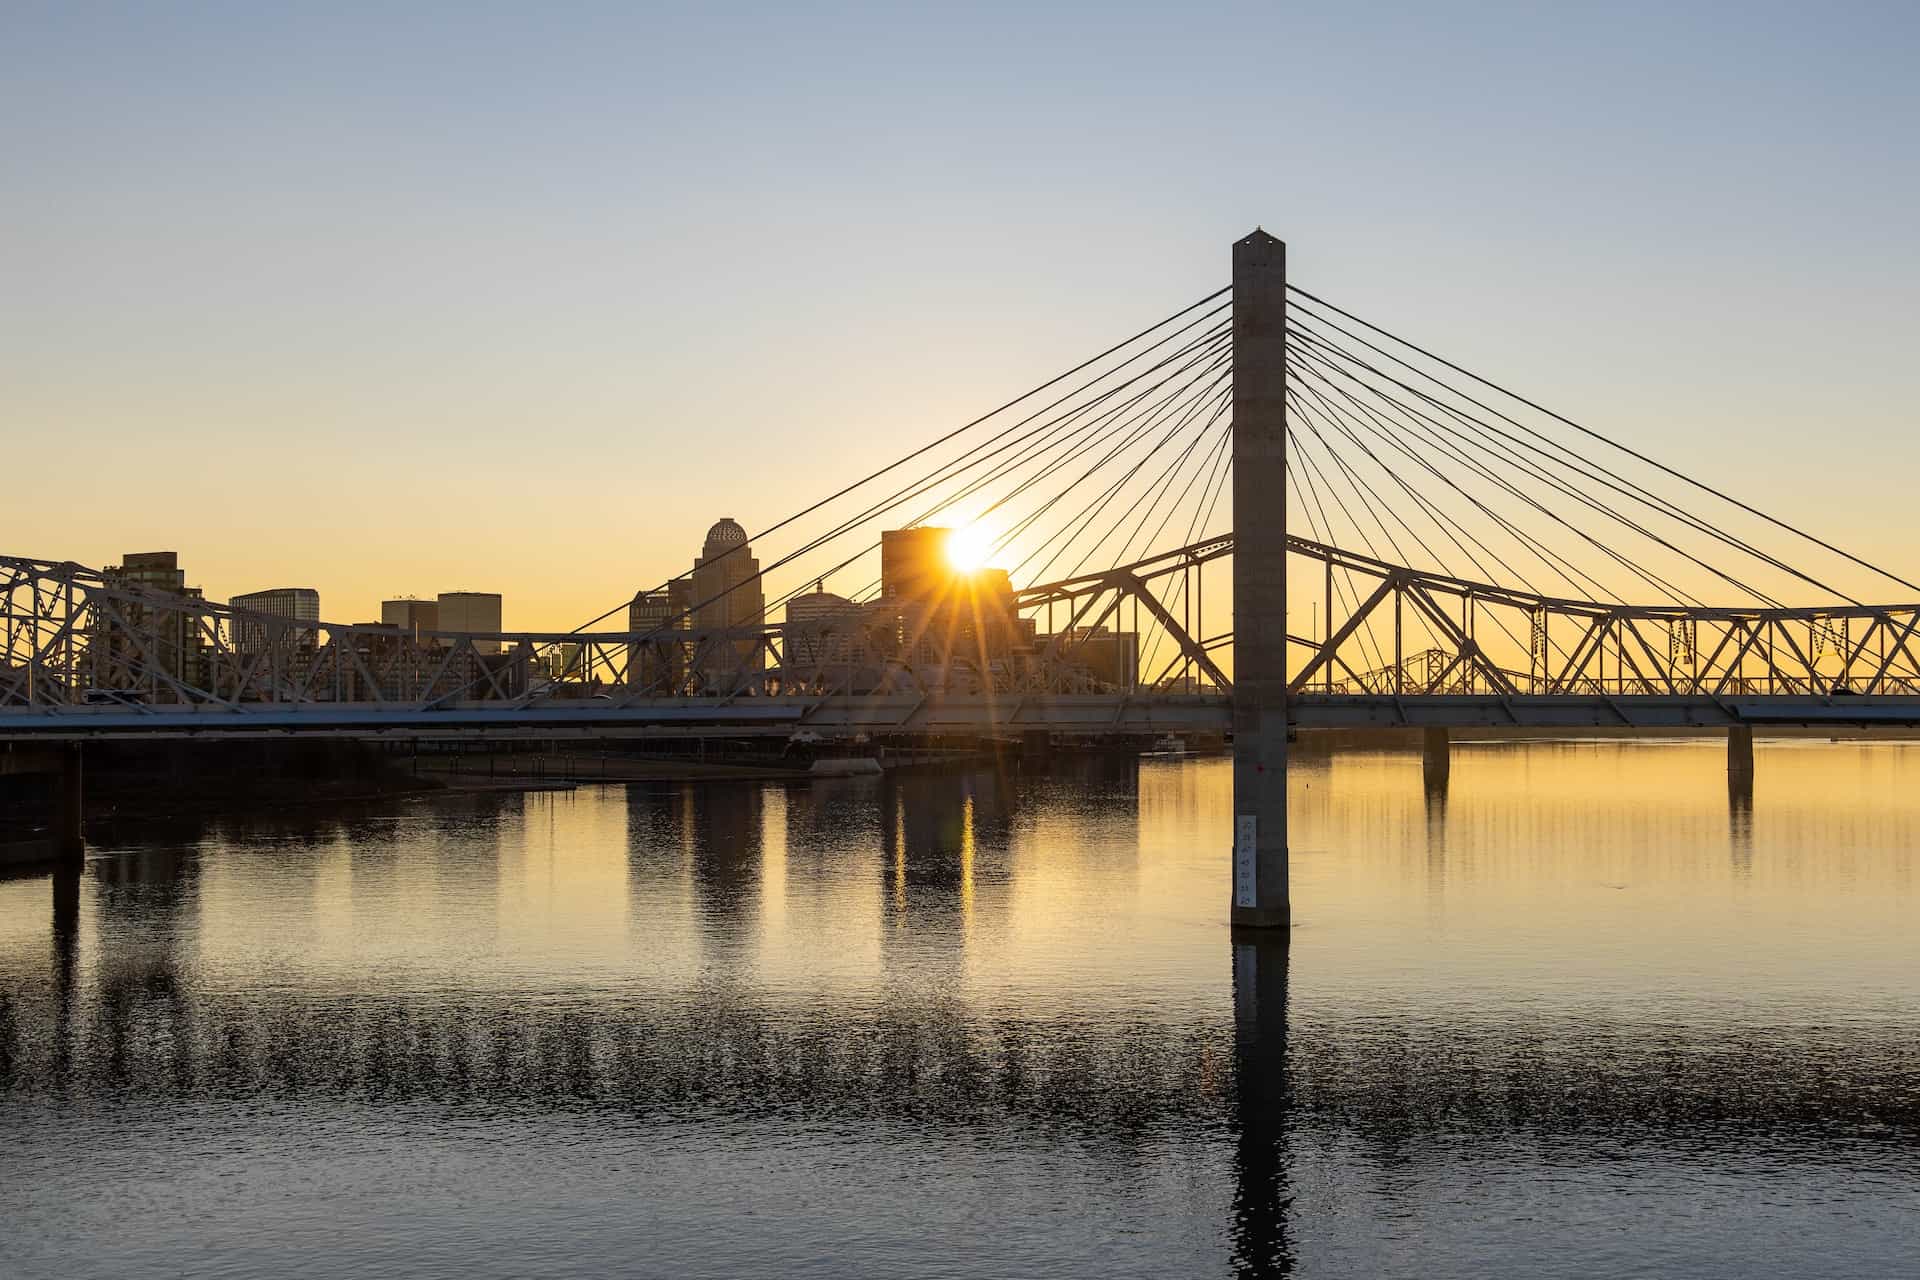 A large bridge cutting across the Ohio River in Louisville, Kentucky, with the city’s tall buildings seen off in the distance behind the bridge and water.